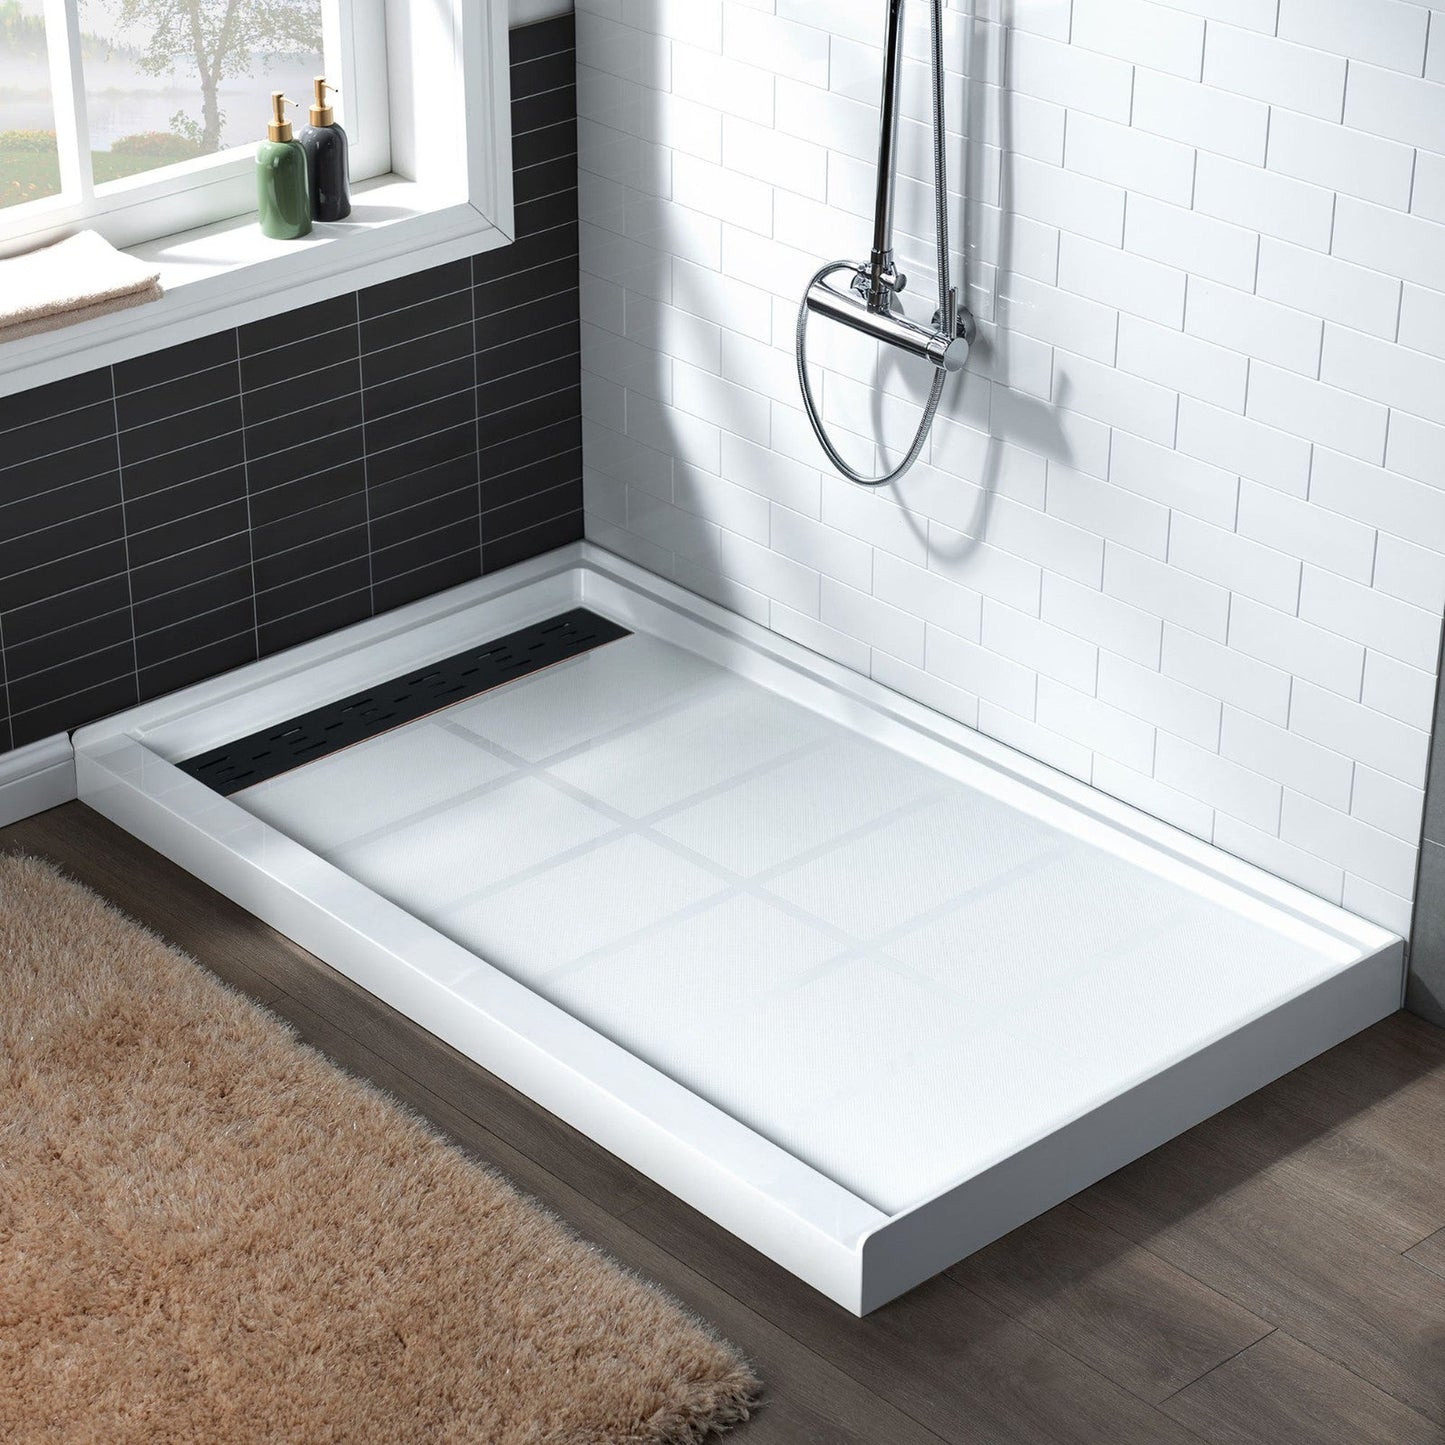 WoodBridge 60" x 36" White Solid Surface Shower Base Left Drain Location With Oil Rubbed Bronze Trench Drain Cover